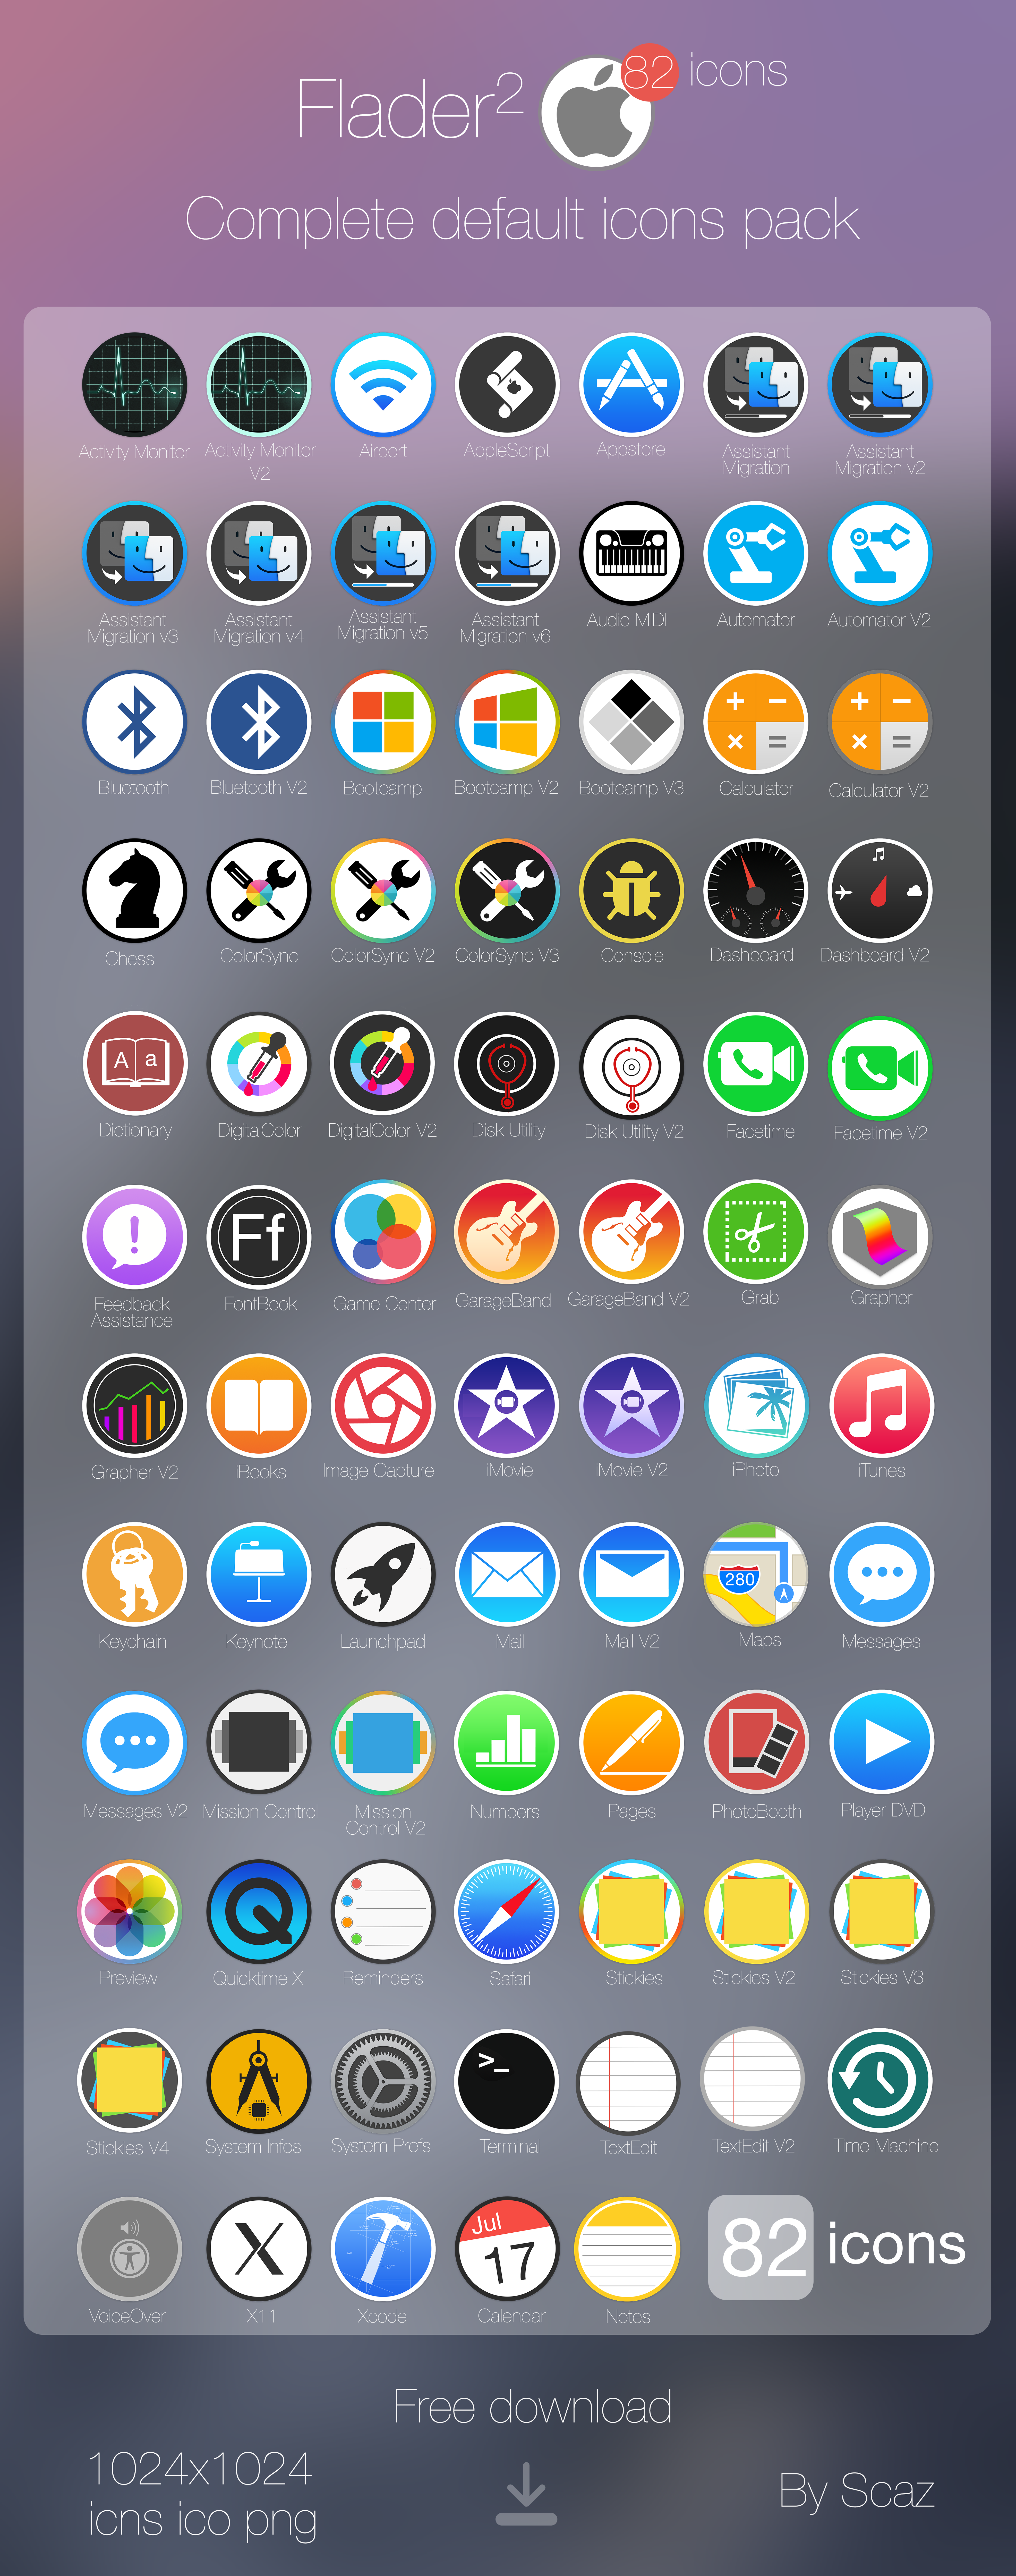 Flader Default Icons For Apple App Mac Os X By Scafer On Deviantart